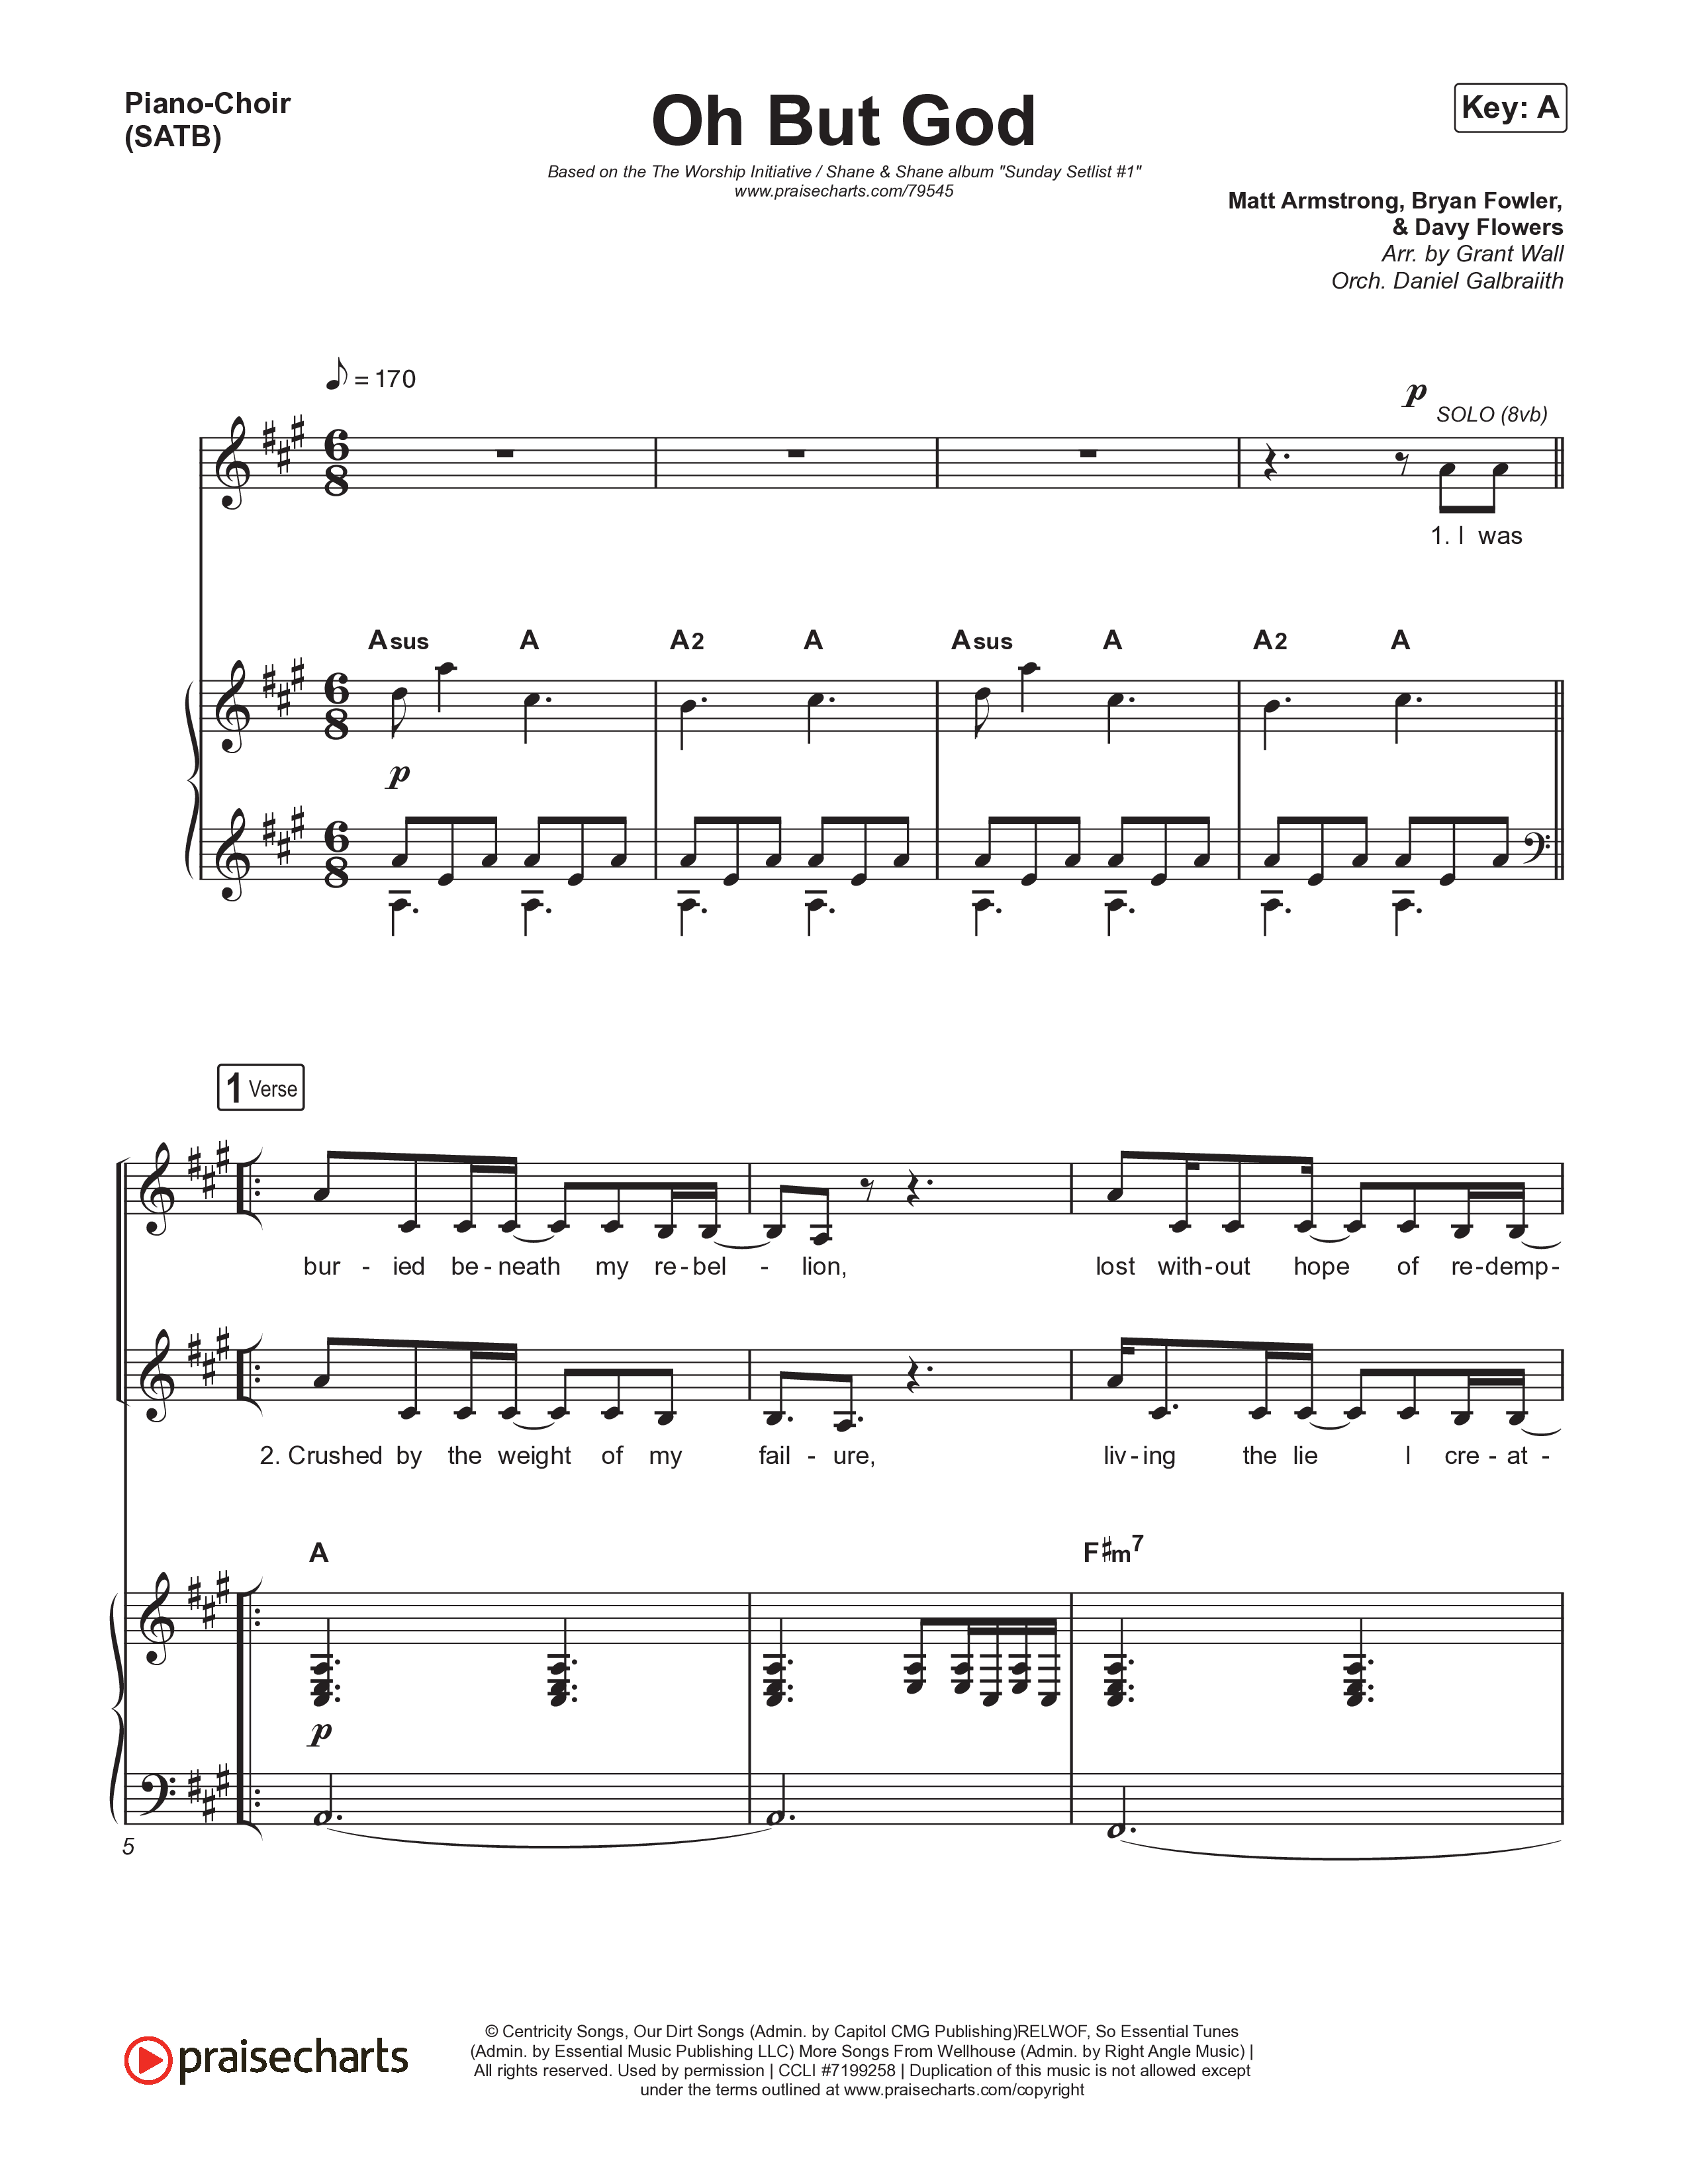 Oh But God Piano/Vocal (SATB) (Shane & Shane / The Worship Initiative)